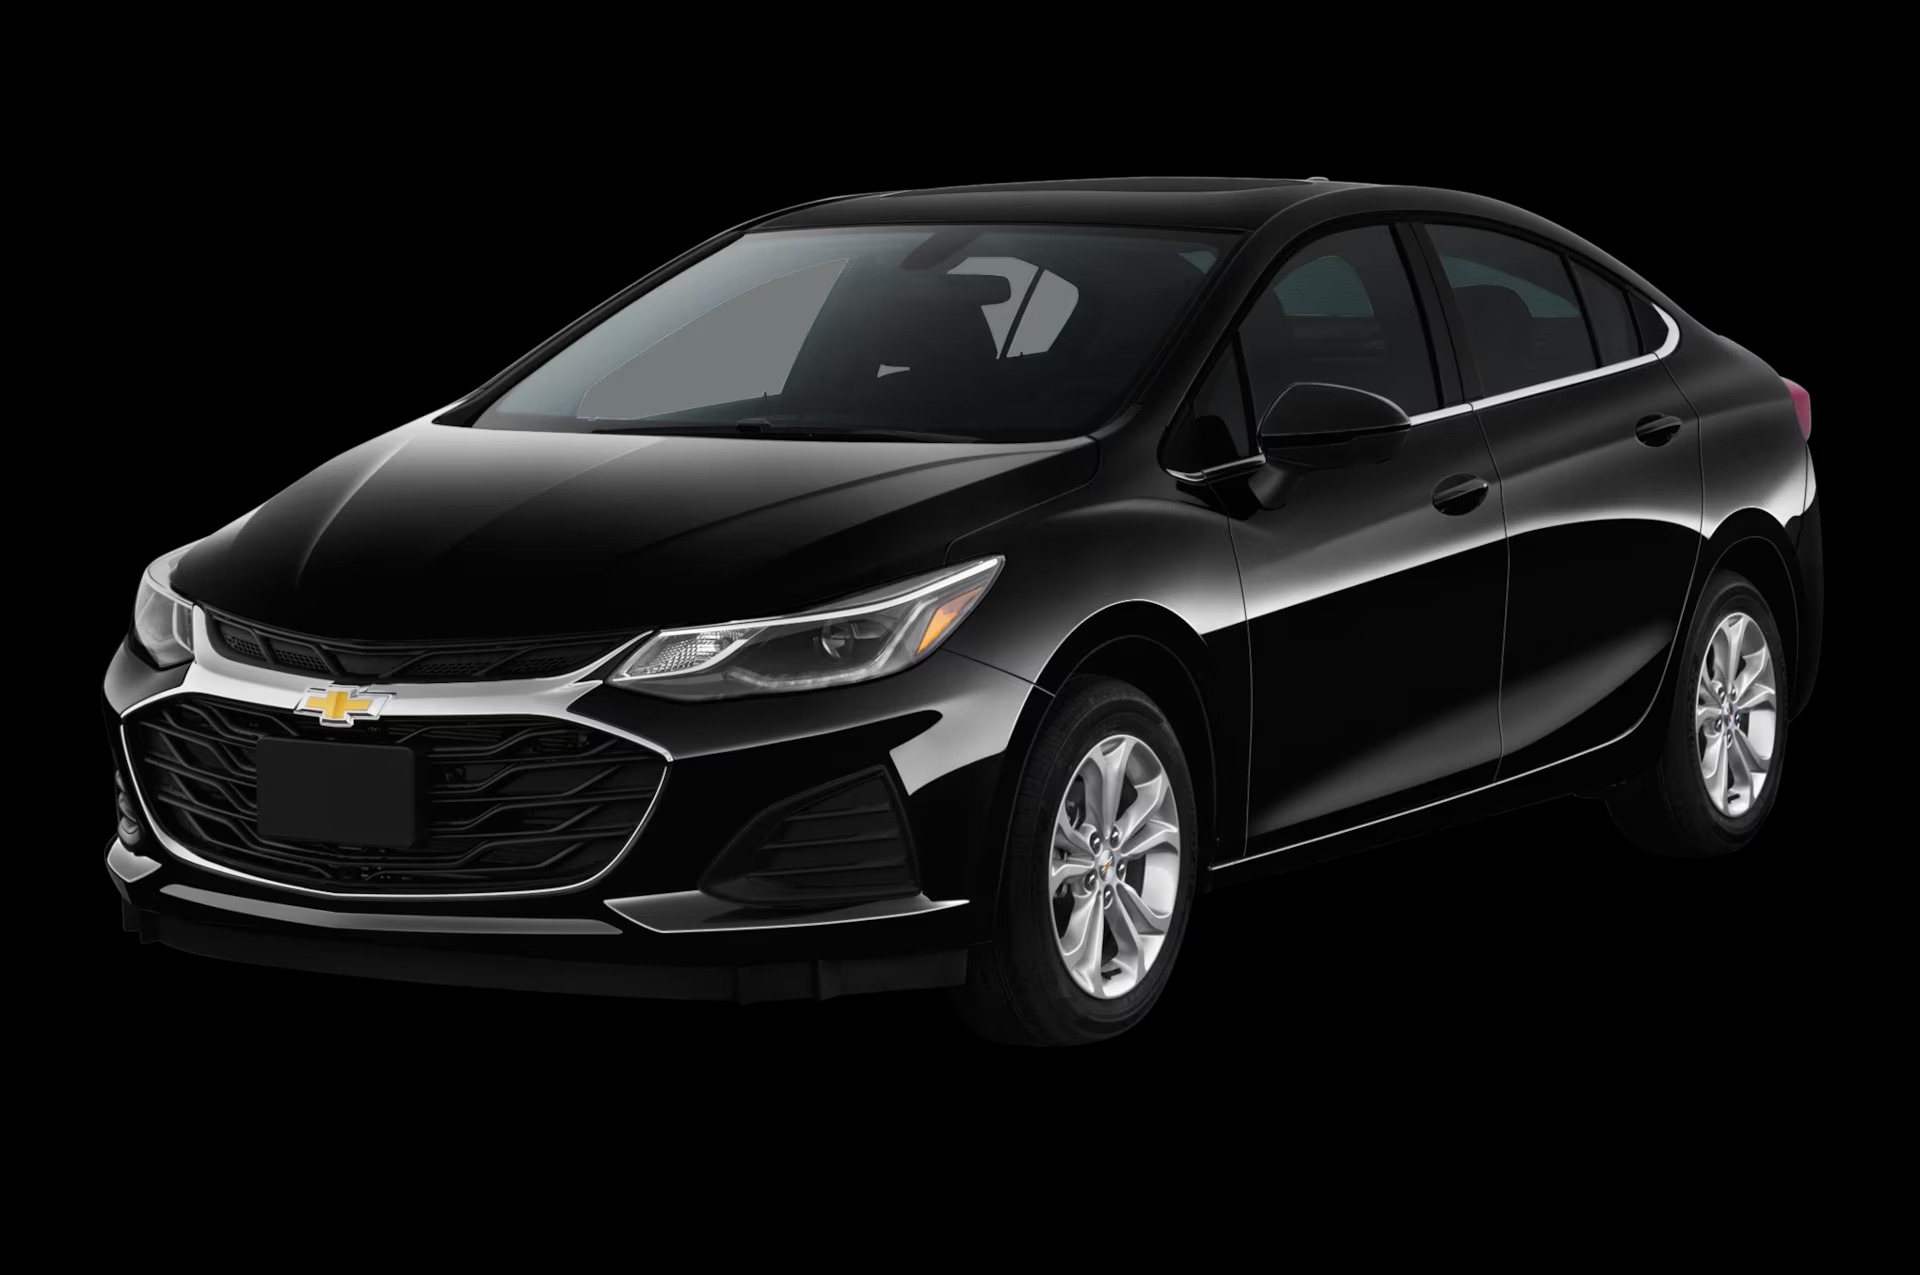 Why Is Chevy Cruze Insurance So Expensive?